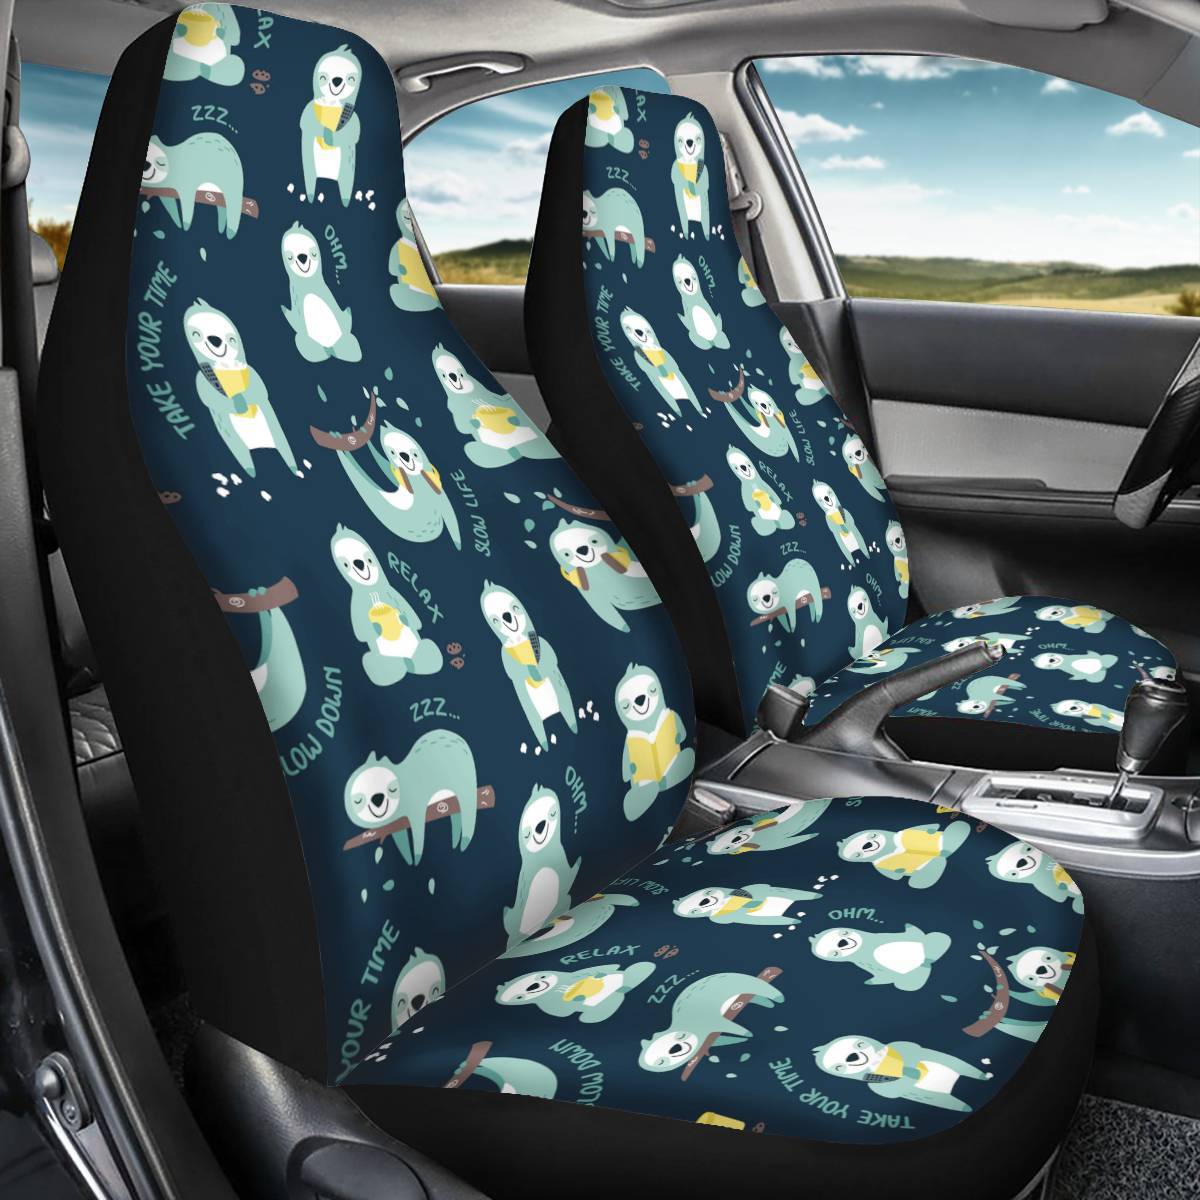 2PCS Front Seat Covers Sloth Print Pattern Universal Fit Seat Covers Will Stretch to Fit Most Car and SUV Bucket Style Seats